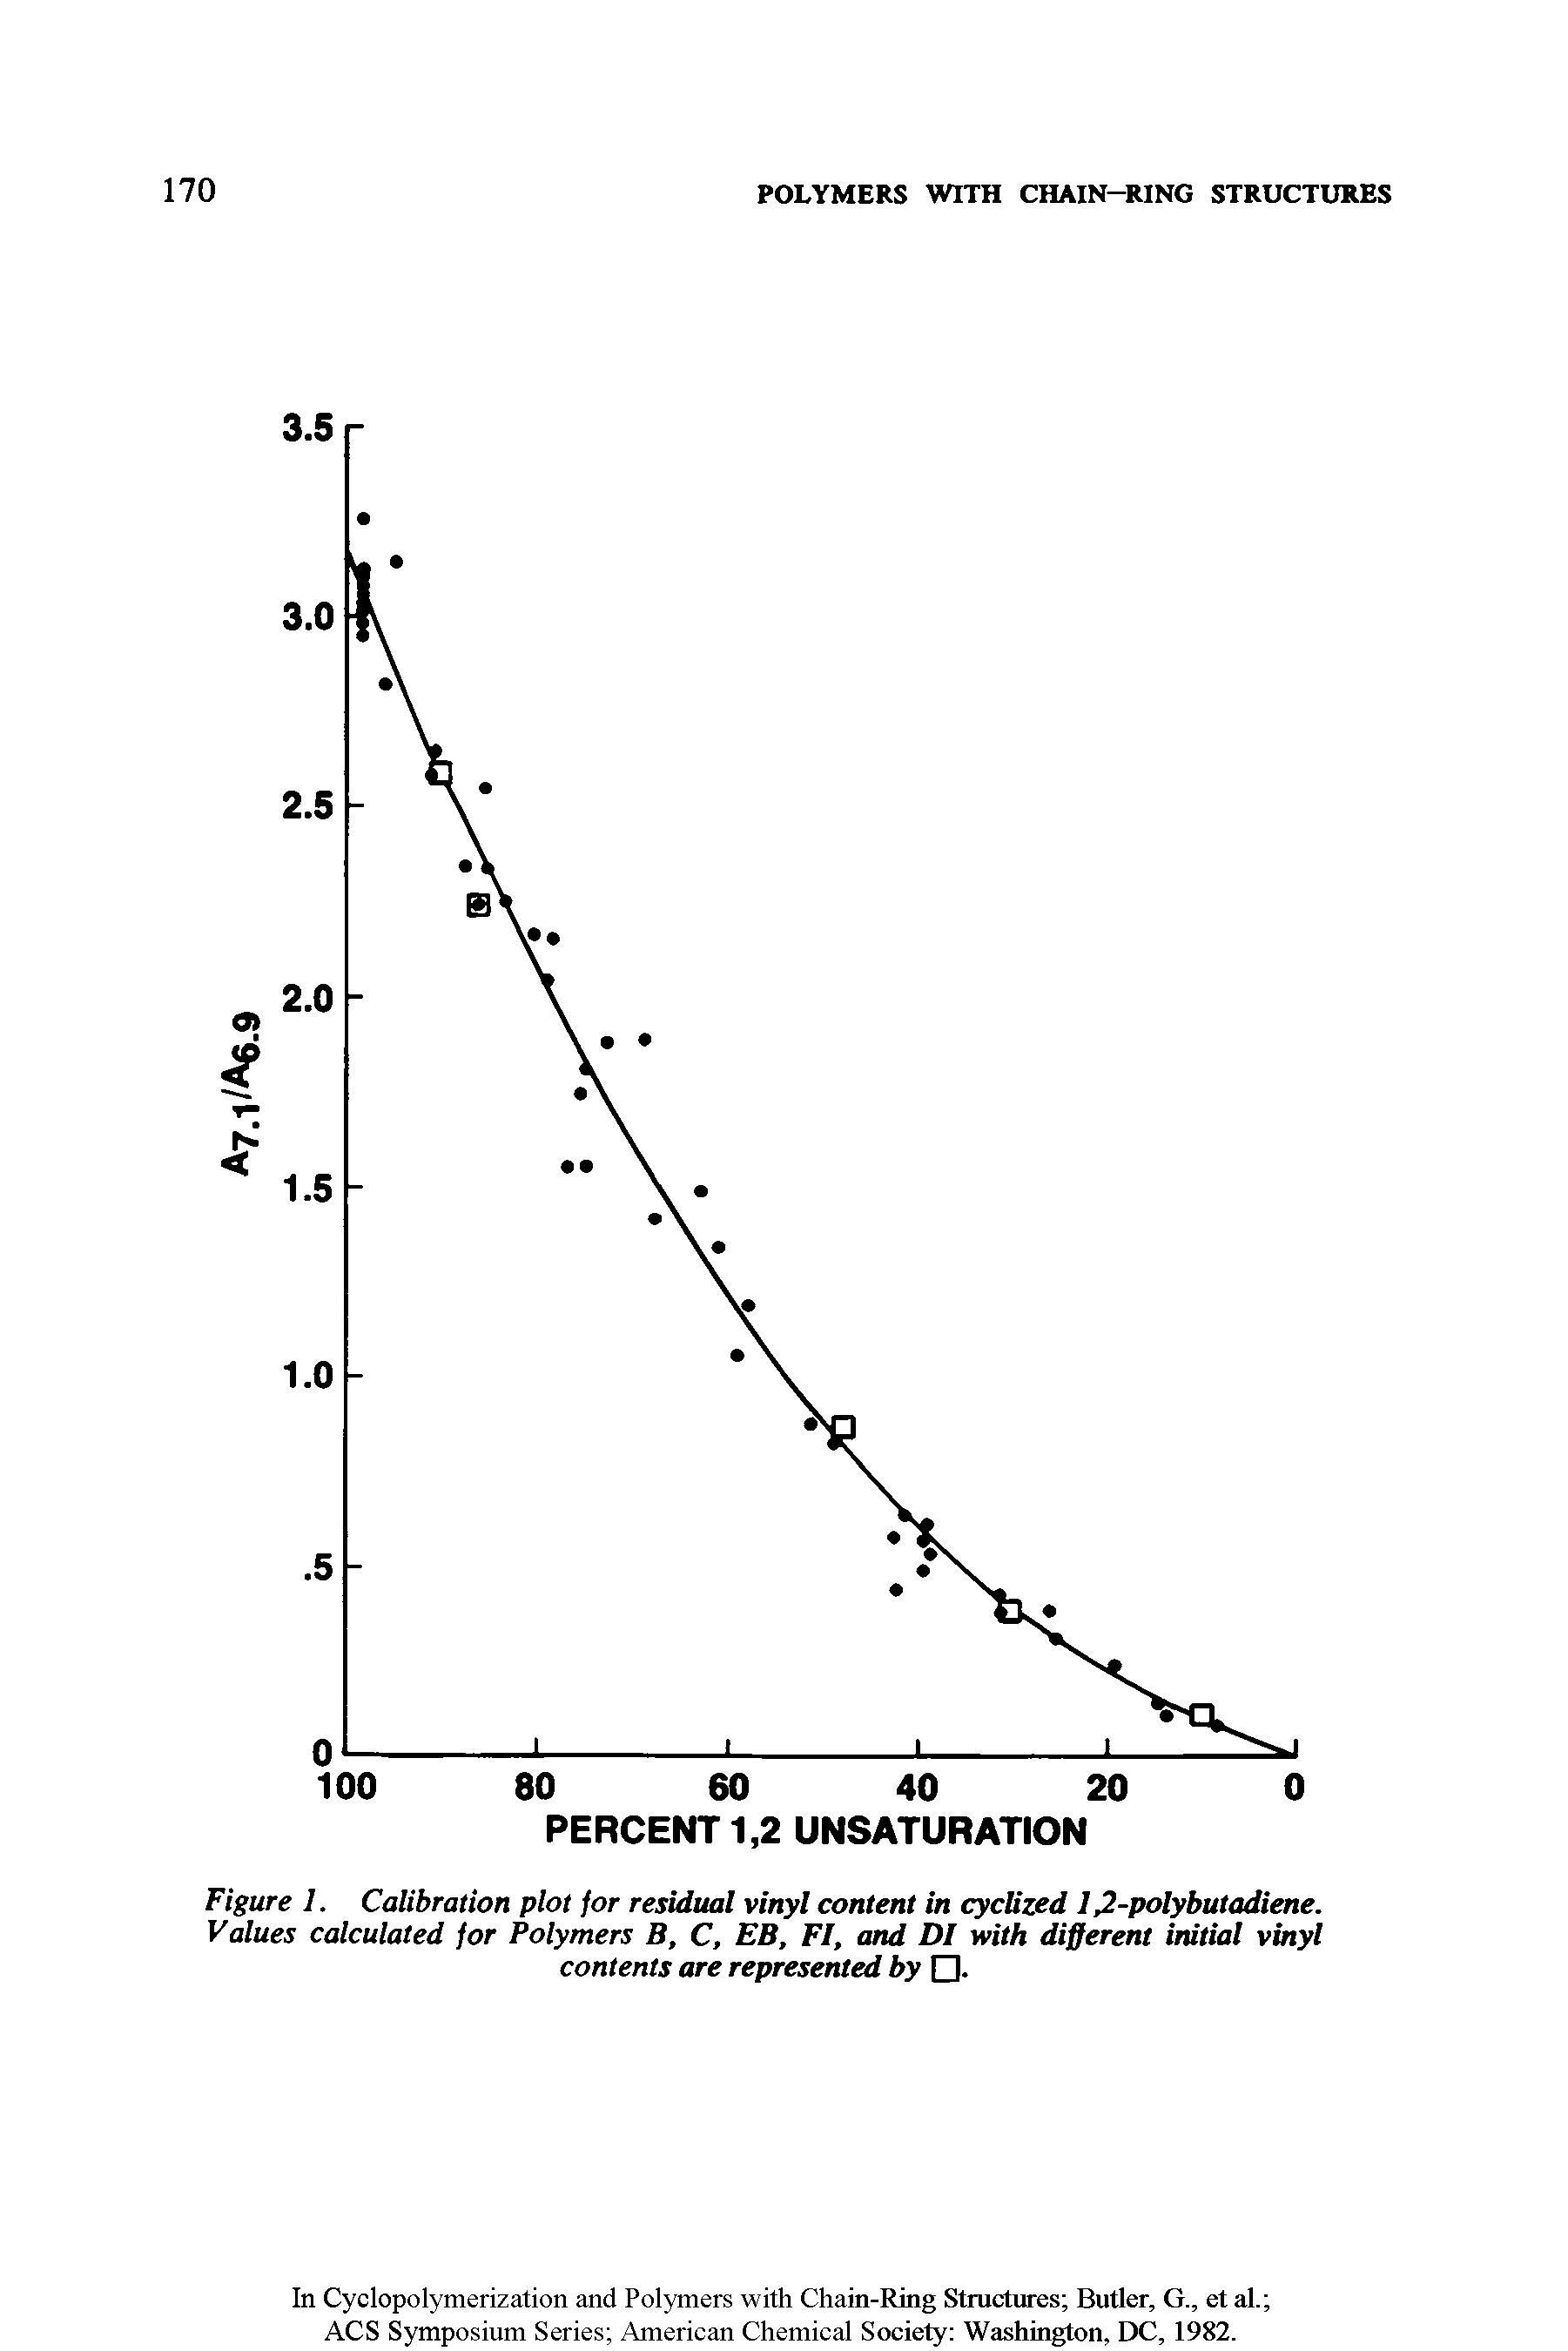 Figure 1. Calibration plot for residual vinyl content in cyclized 12-polybutadiene. Values calculated for Polymers B, C, EB, FI, and DI with different initial vinyl contents are represented by...